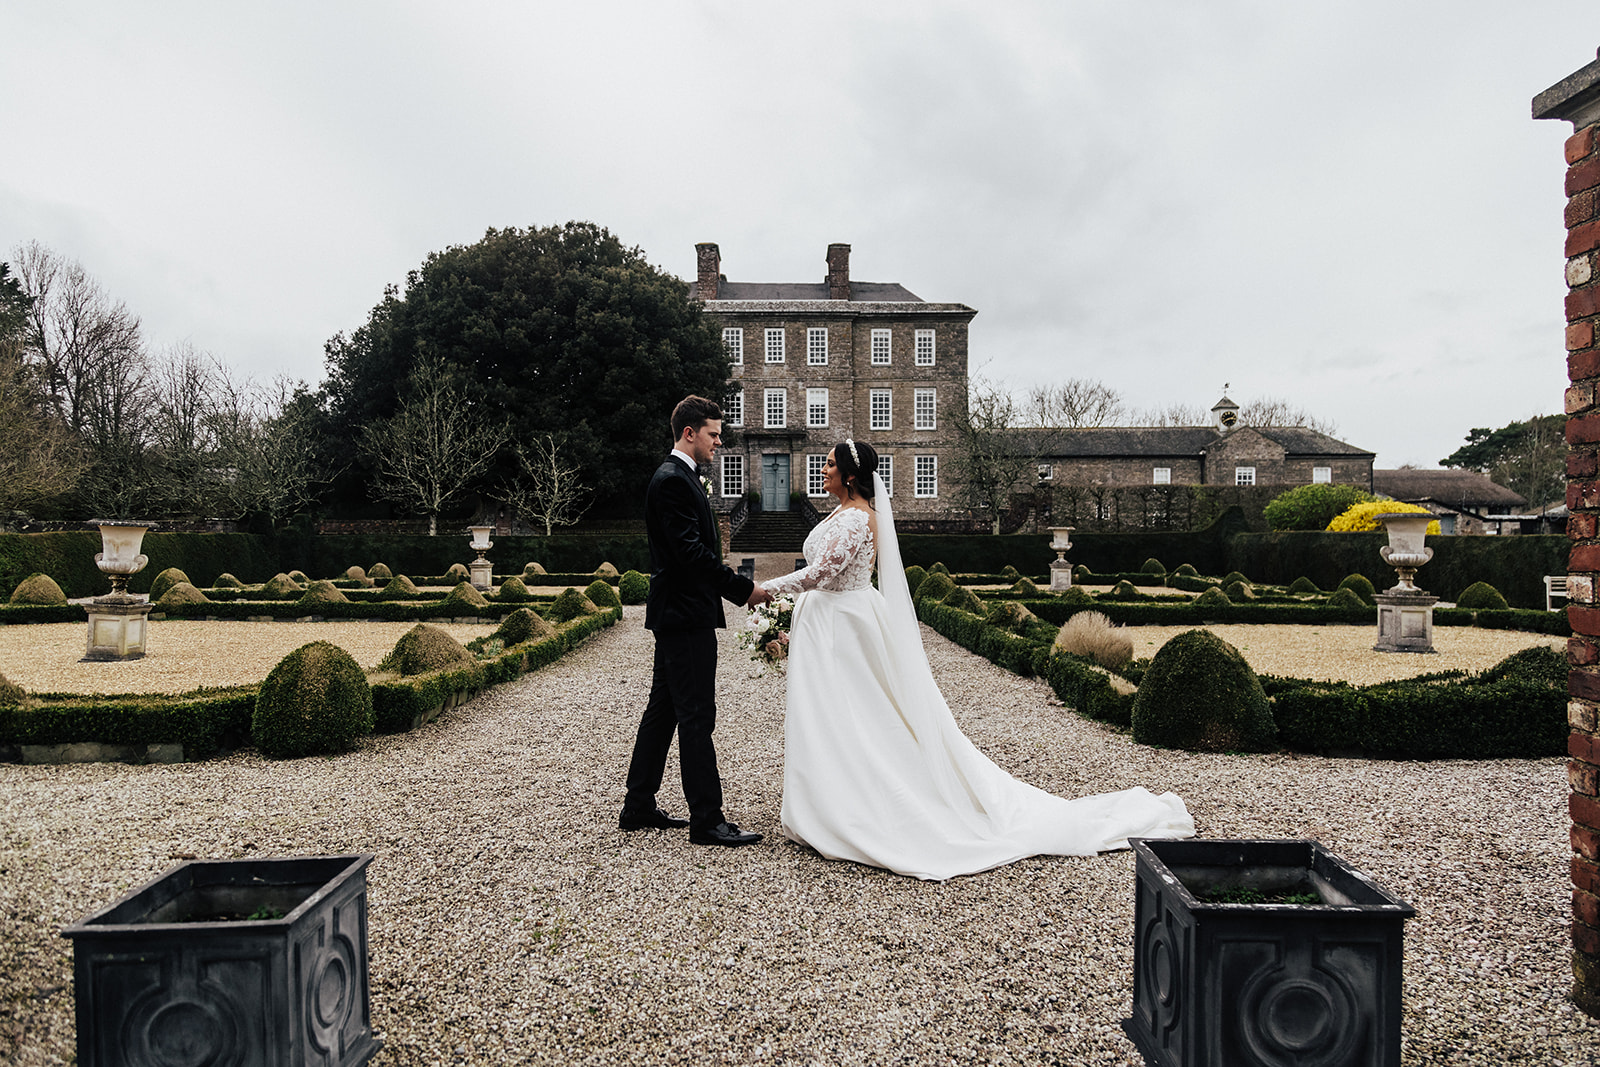 A couple who got married at Kingston Estate in Devon